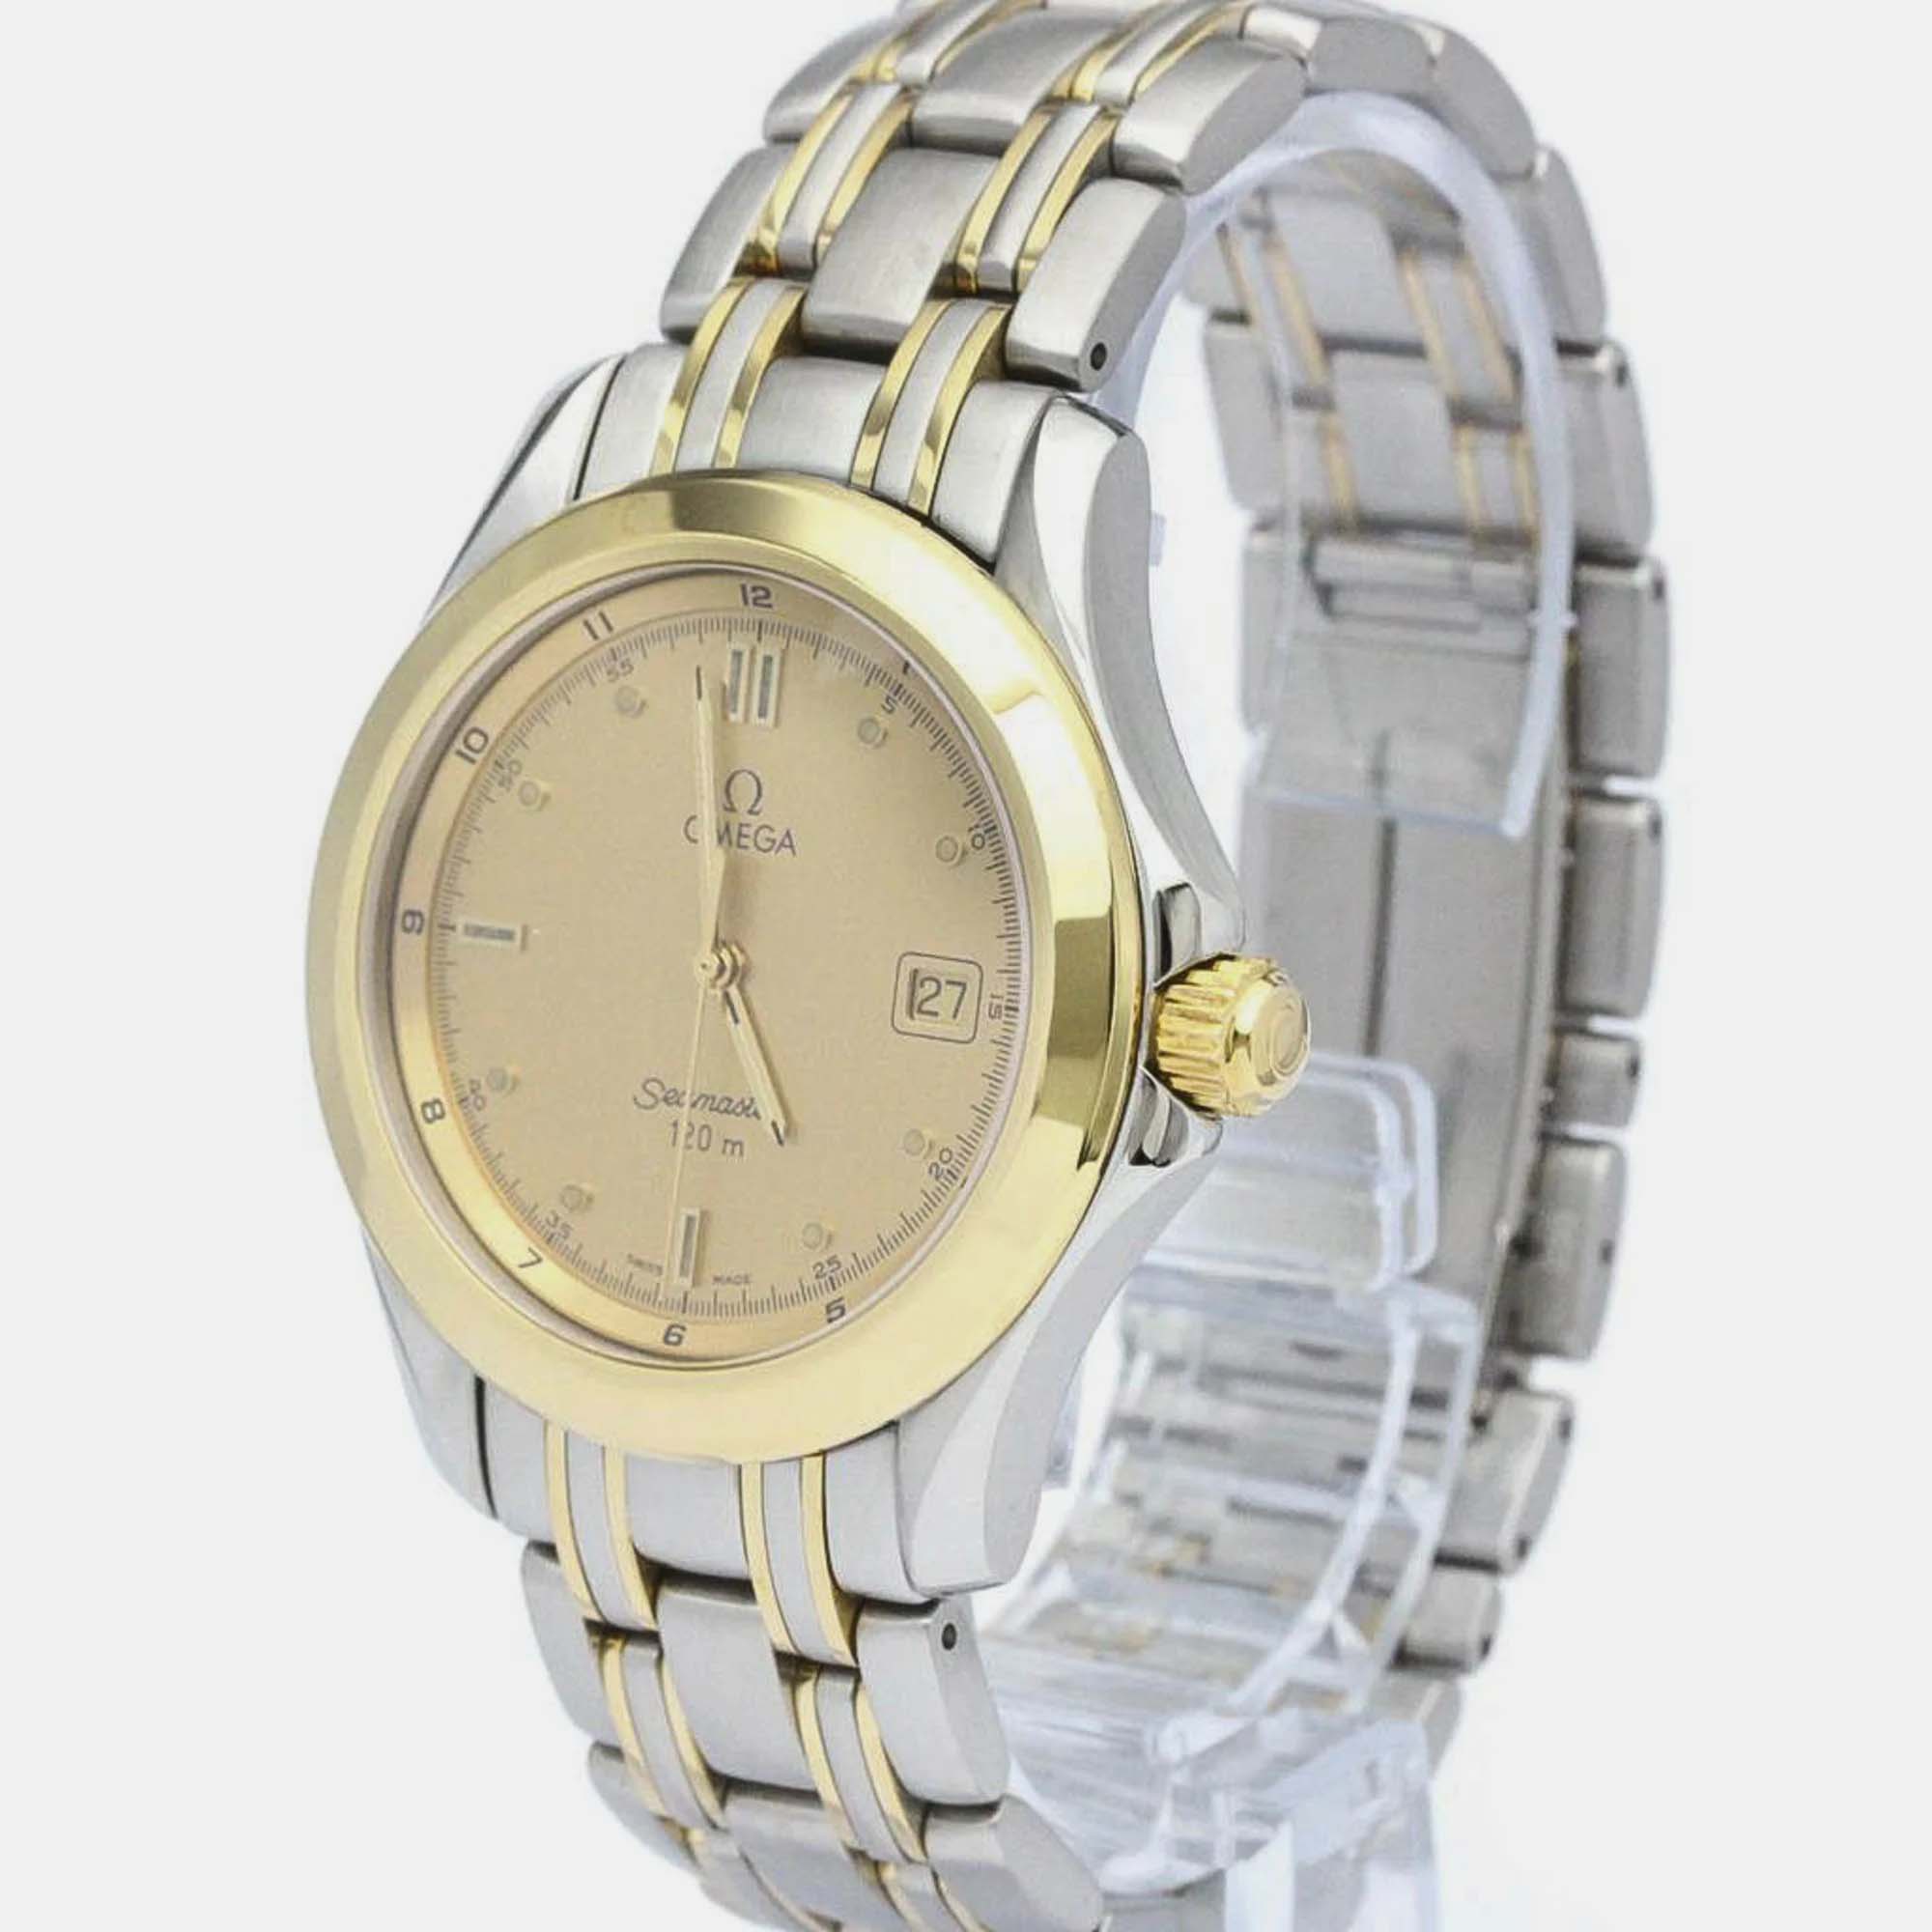 

Omega Gold 18k Yellow Gold And Stainless Steel Seamaster 2311.11 Quartz Men's Wristwatch 36 mm